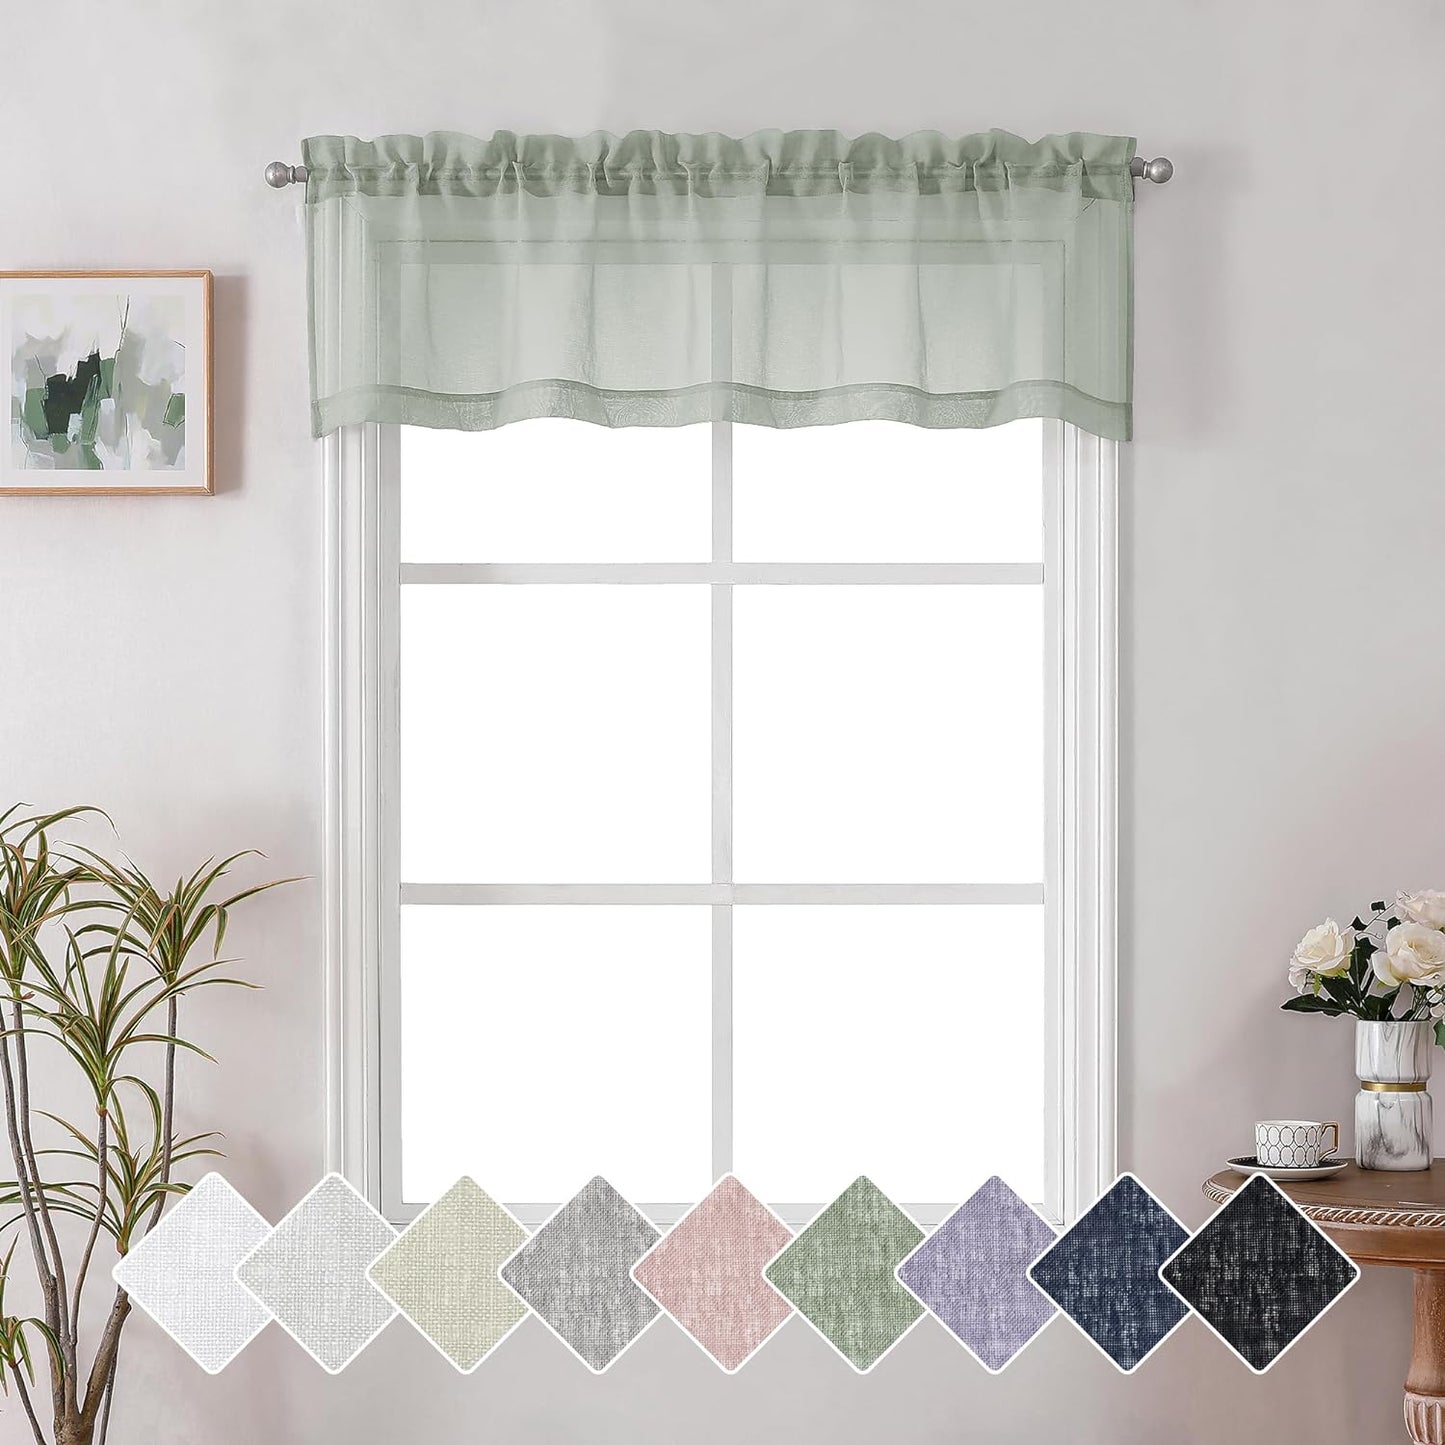 Lecloud Doris Faux Linen Sheer Grey Valance Curtains 14 Inches Length, Cafe Kitchen Bedroom Living Room Gauzy Silver Grey Curtain for Small Window, Slub Light Gray Valance Dual Rod Pockets 60X14 Inch  Lecloud Sage Green 60 W X 14 L 